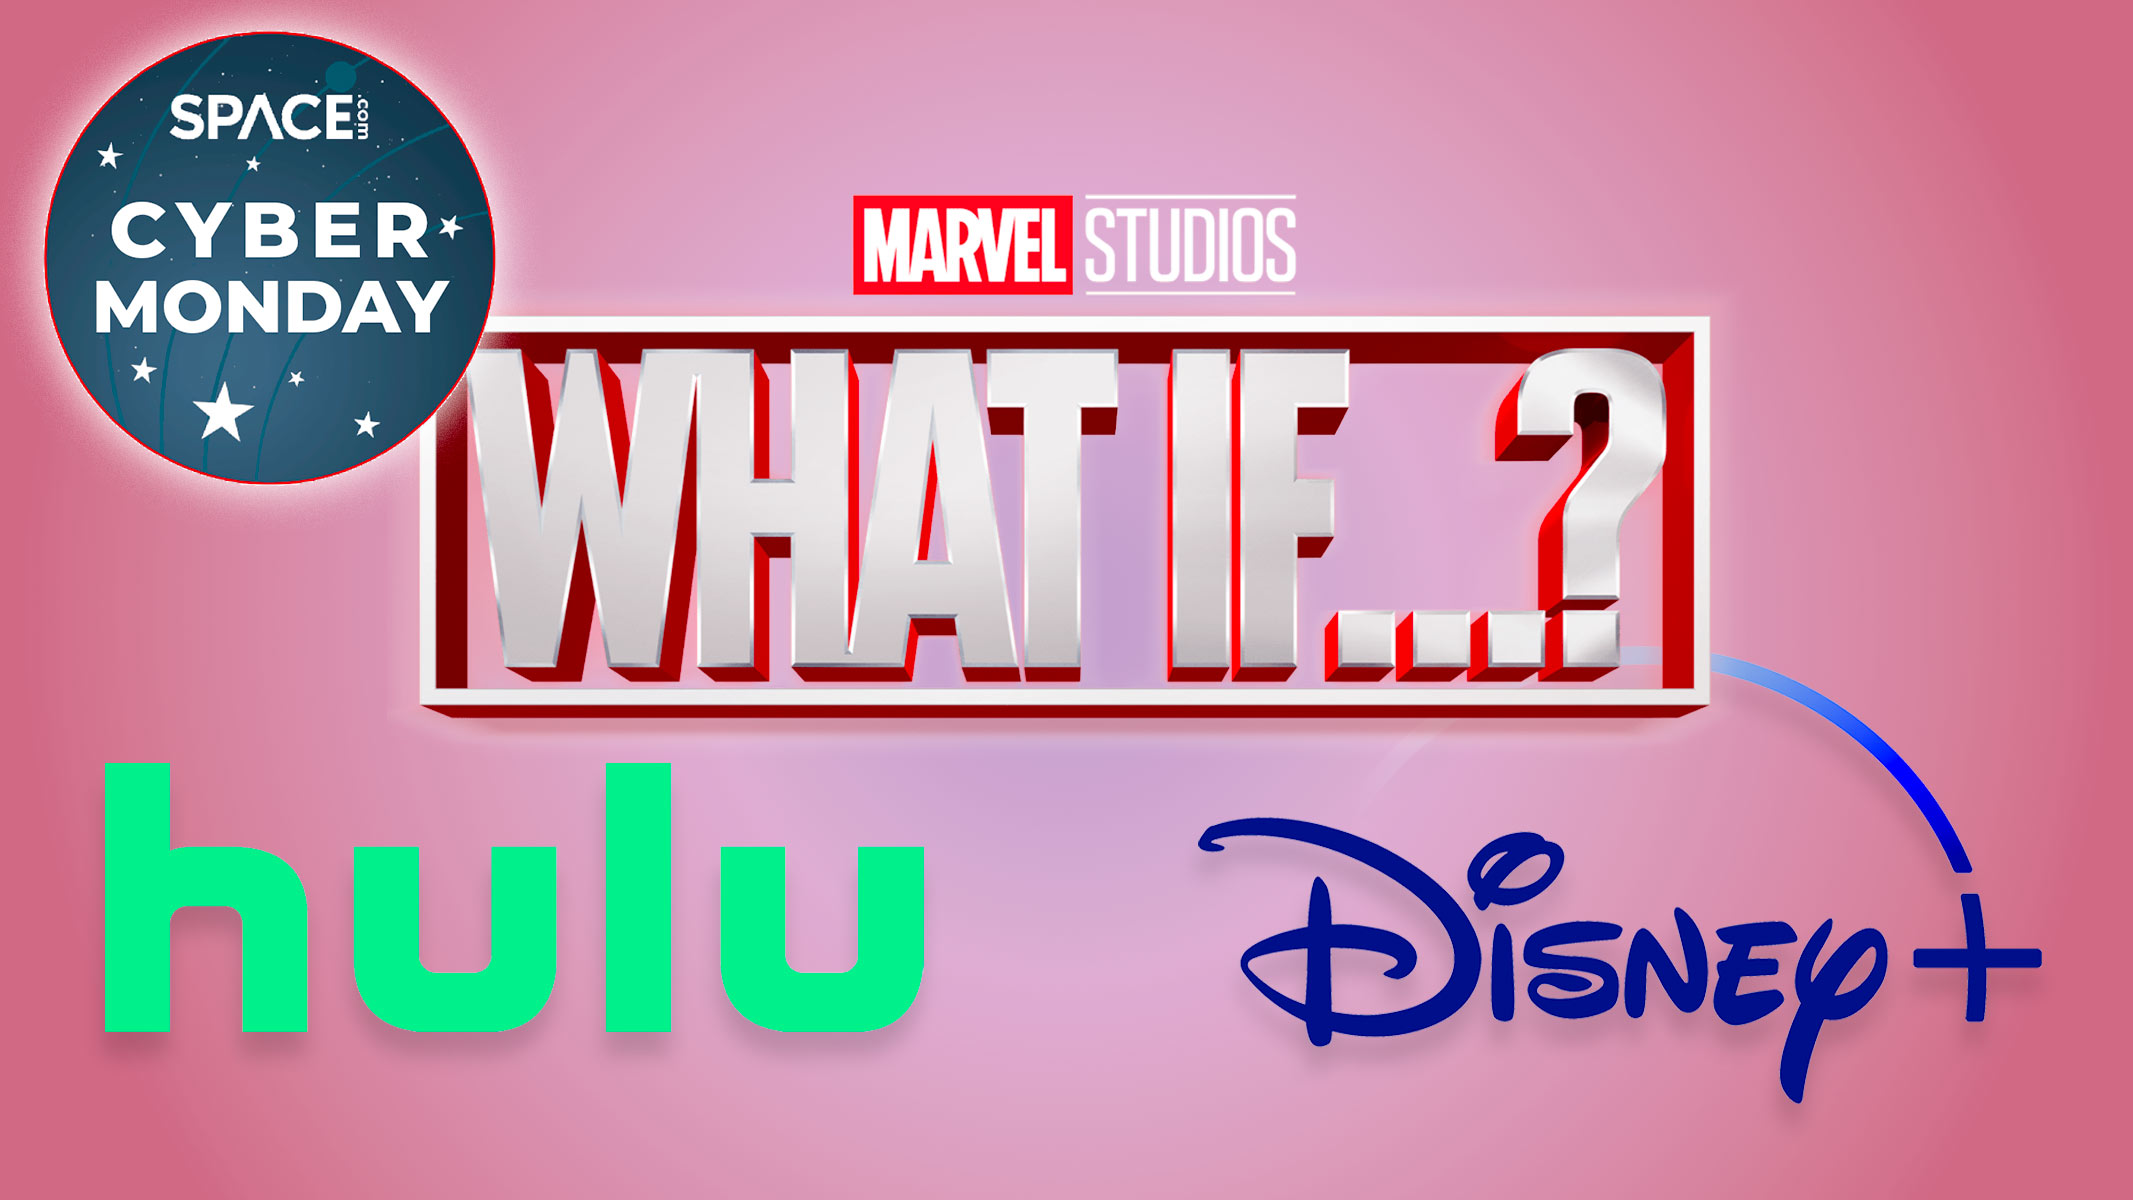 Watch the next season of Marvel’s ‘What If’ on Disney Plus: $2.99 Cyber Monday deal Space